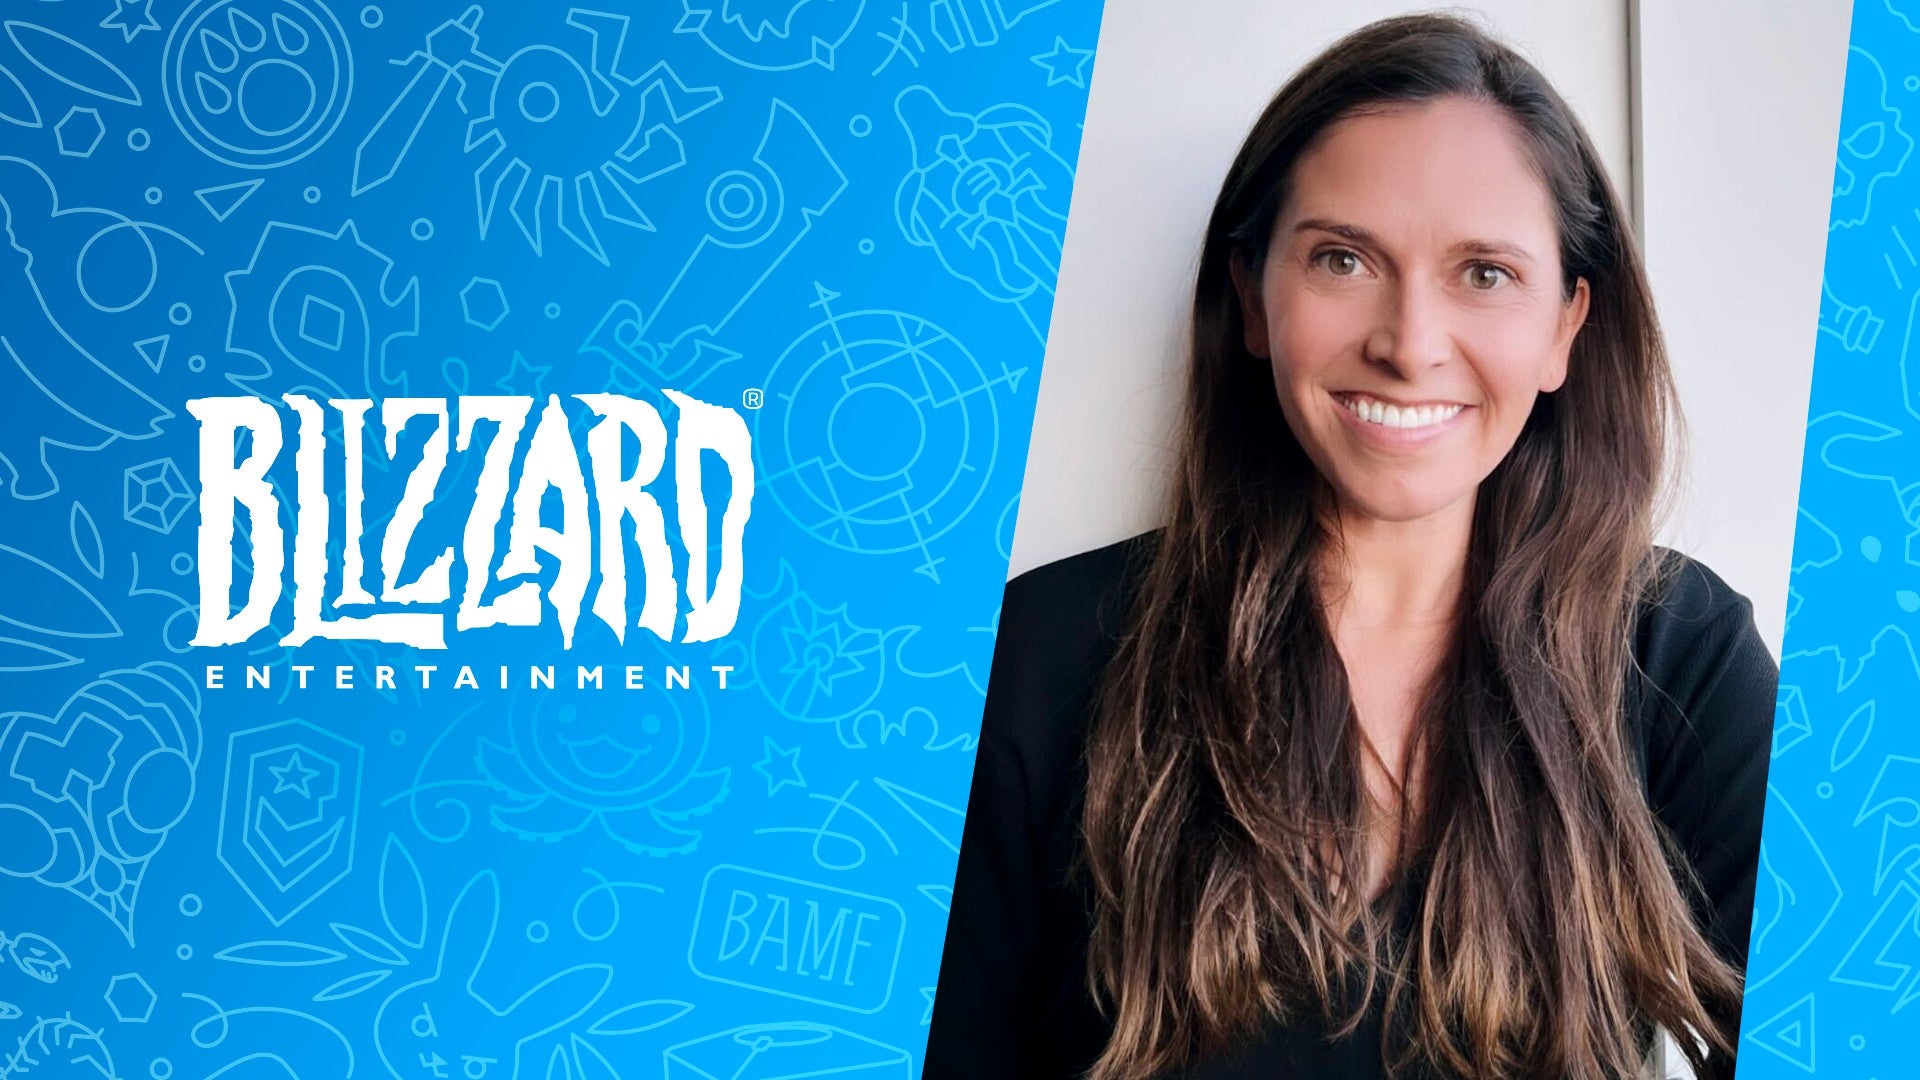 Image for Blizzard hires new vice president of culture amid ongoing company controversies